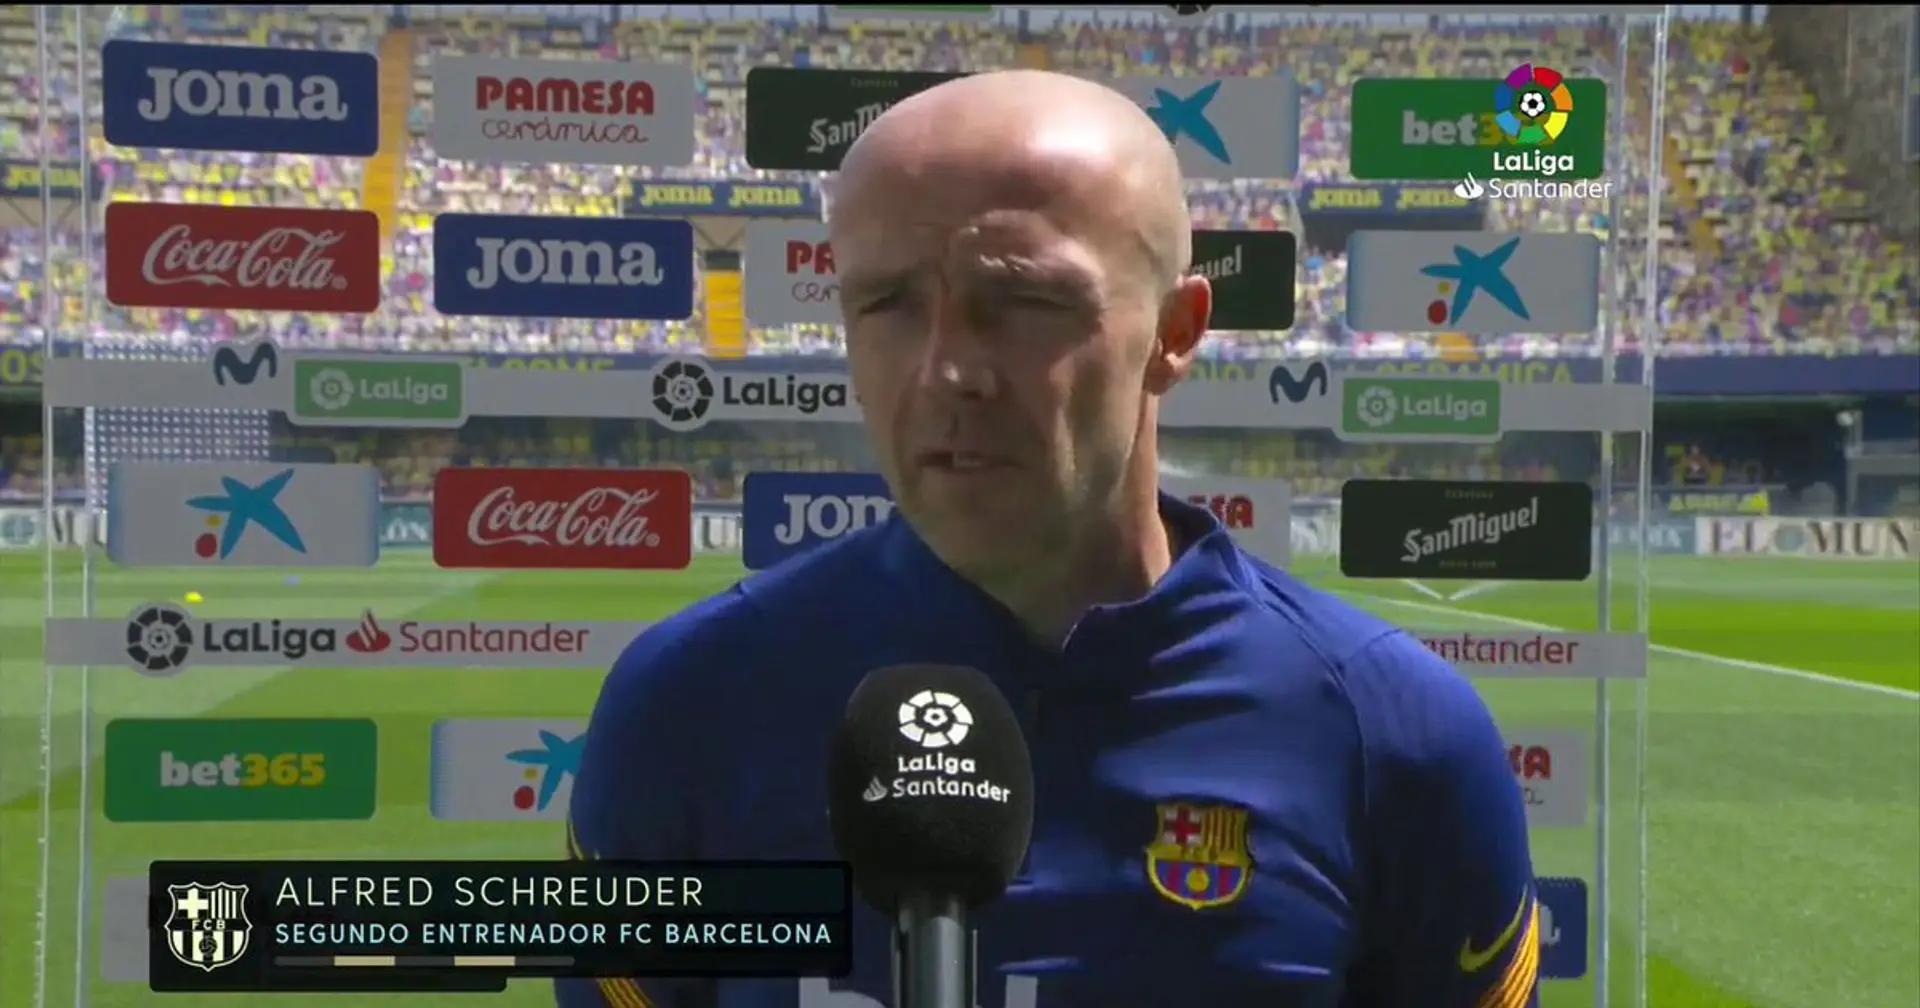 Assistant Schreuder set to lead Barca vs Valencia — key things to know about him